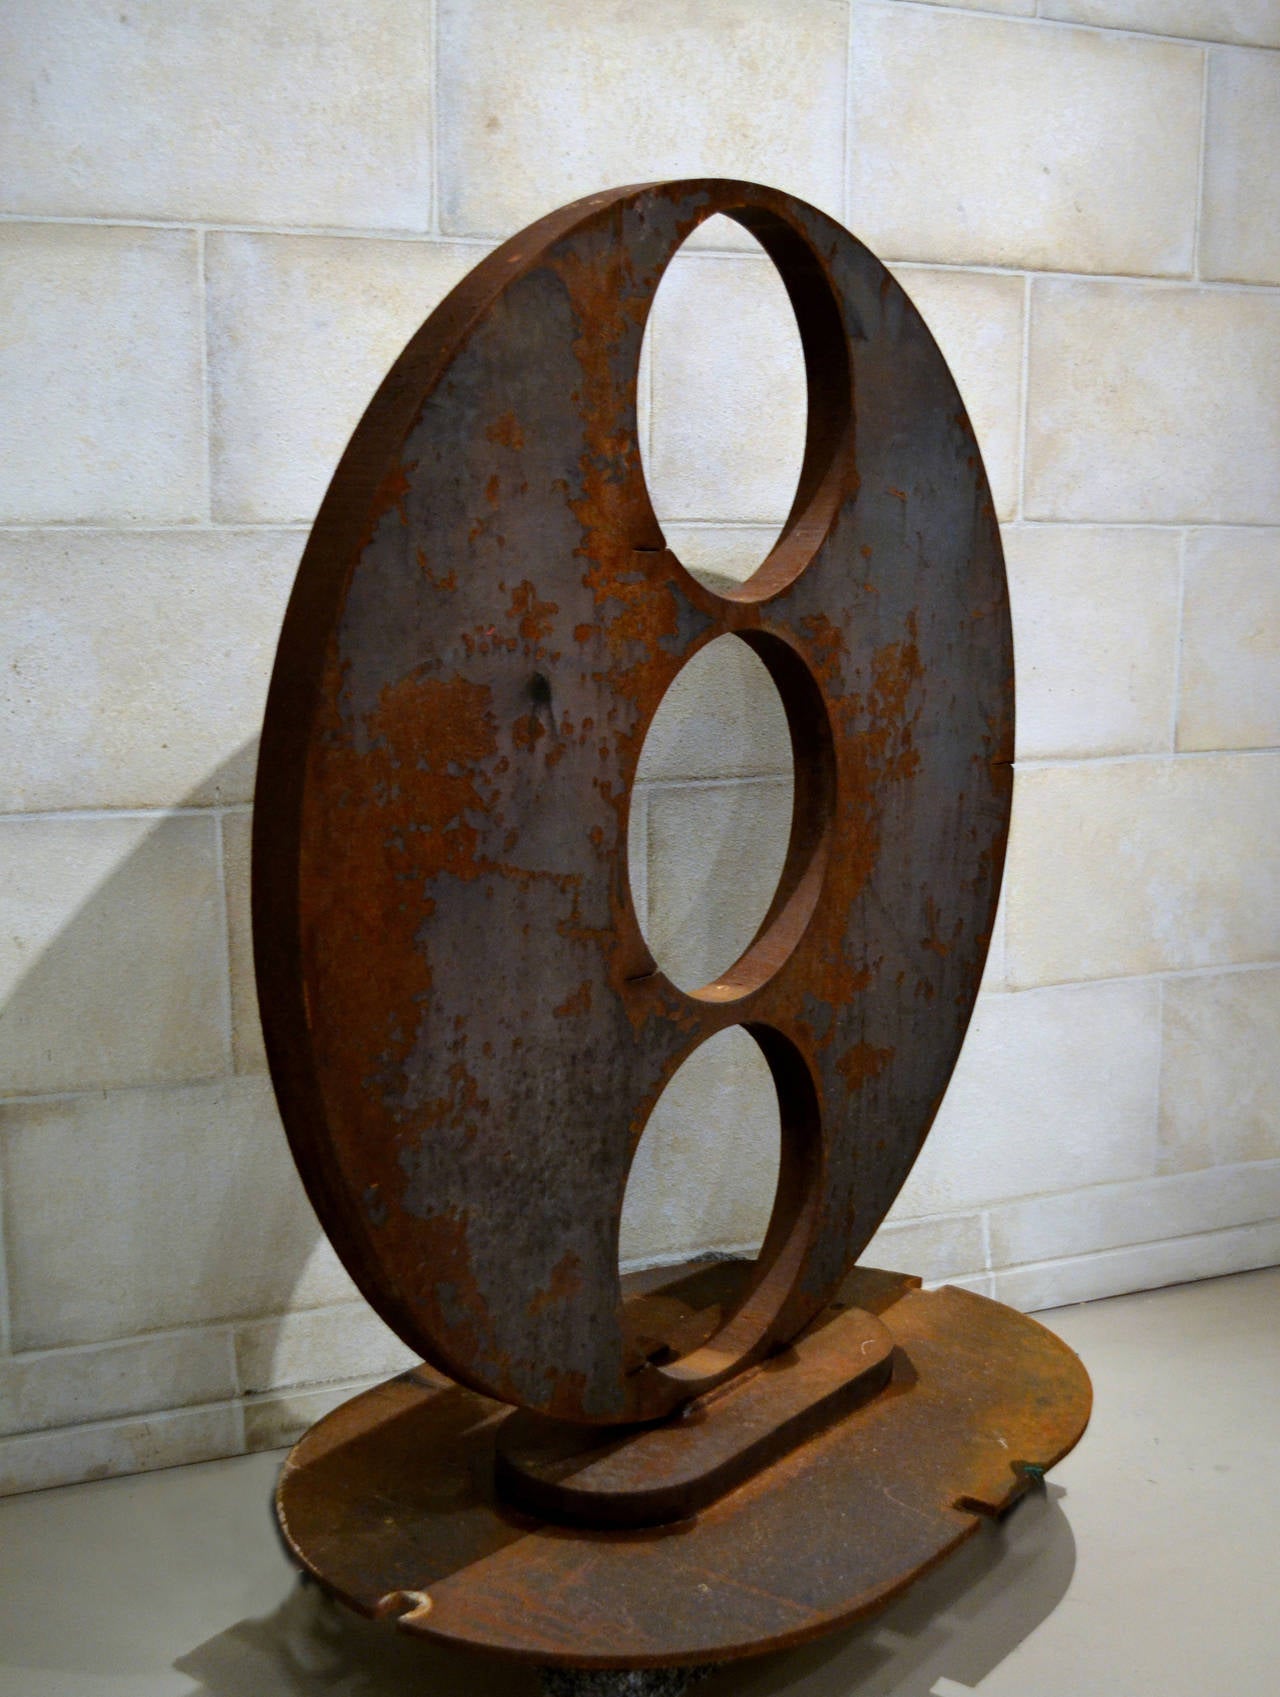 Artist Simi Dabah (b. 1927), a highly respected and listed California artist is known for his commitment to the environment by only creating his sculptures
using industrial reclaimed steel. 

He assembles steel pieces and often cuts out elements